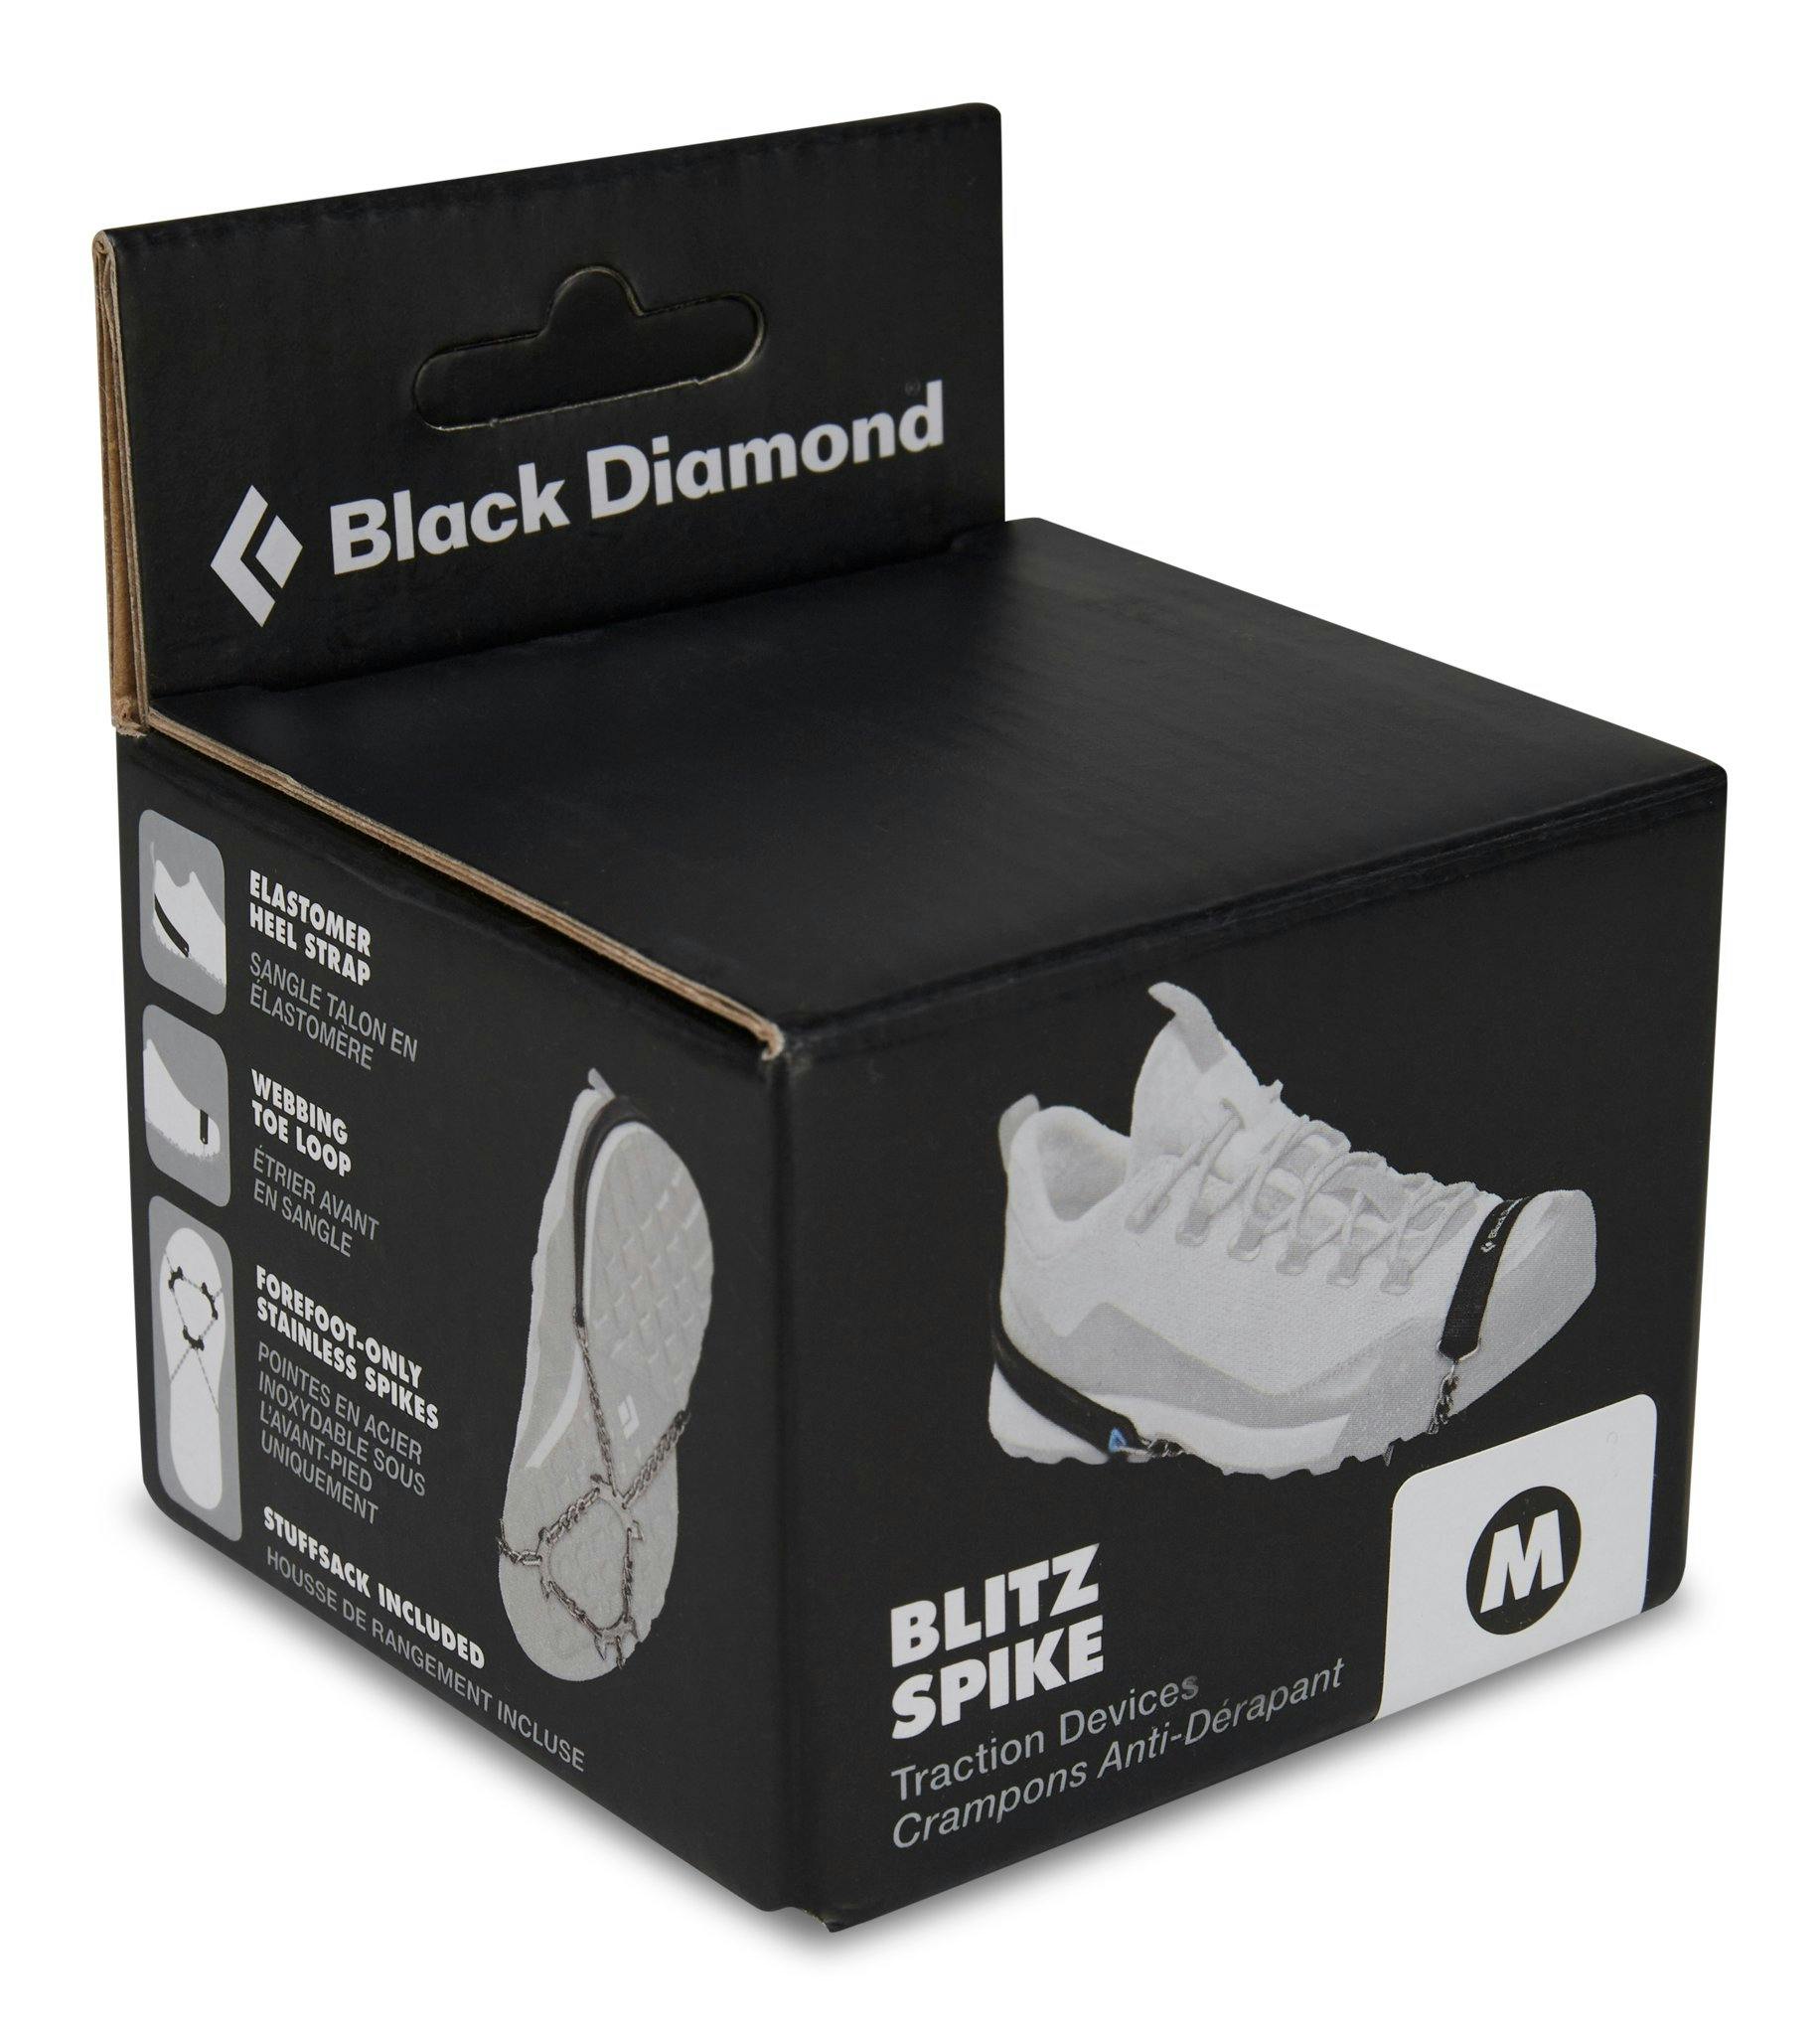 Product image for Blitz Spike Traction Device